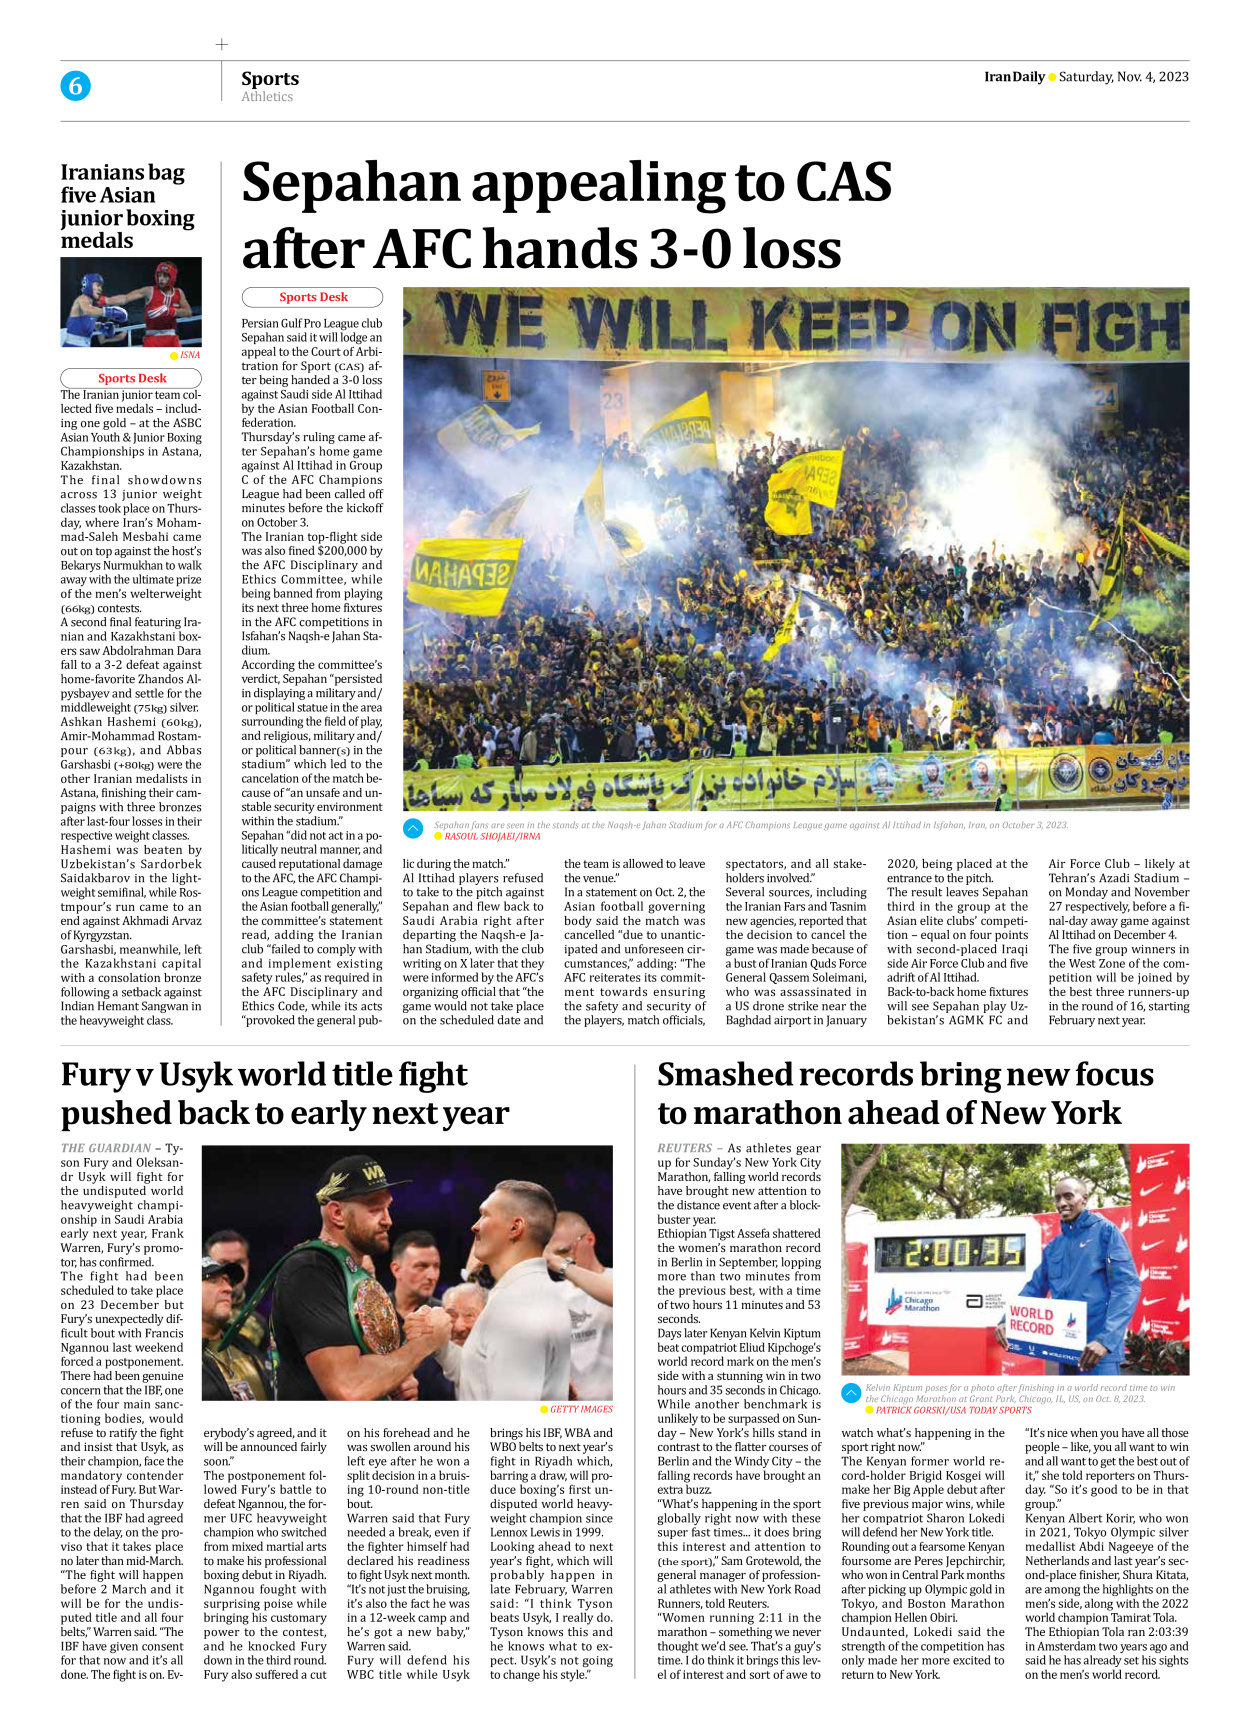 Iran Daily - Number Seven Thousand Four Hundred and Twenty Five - 04 November 2023 - Page 6